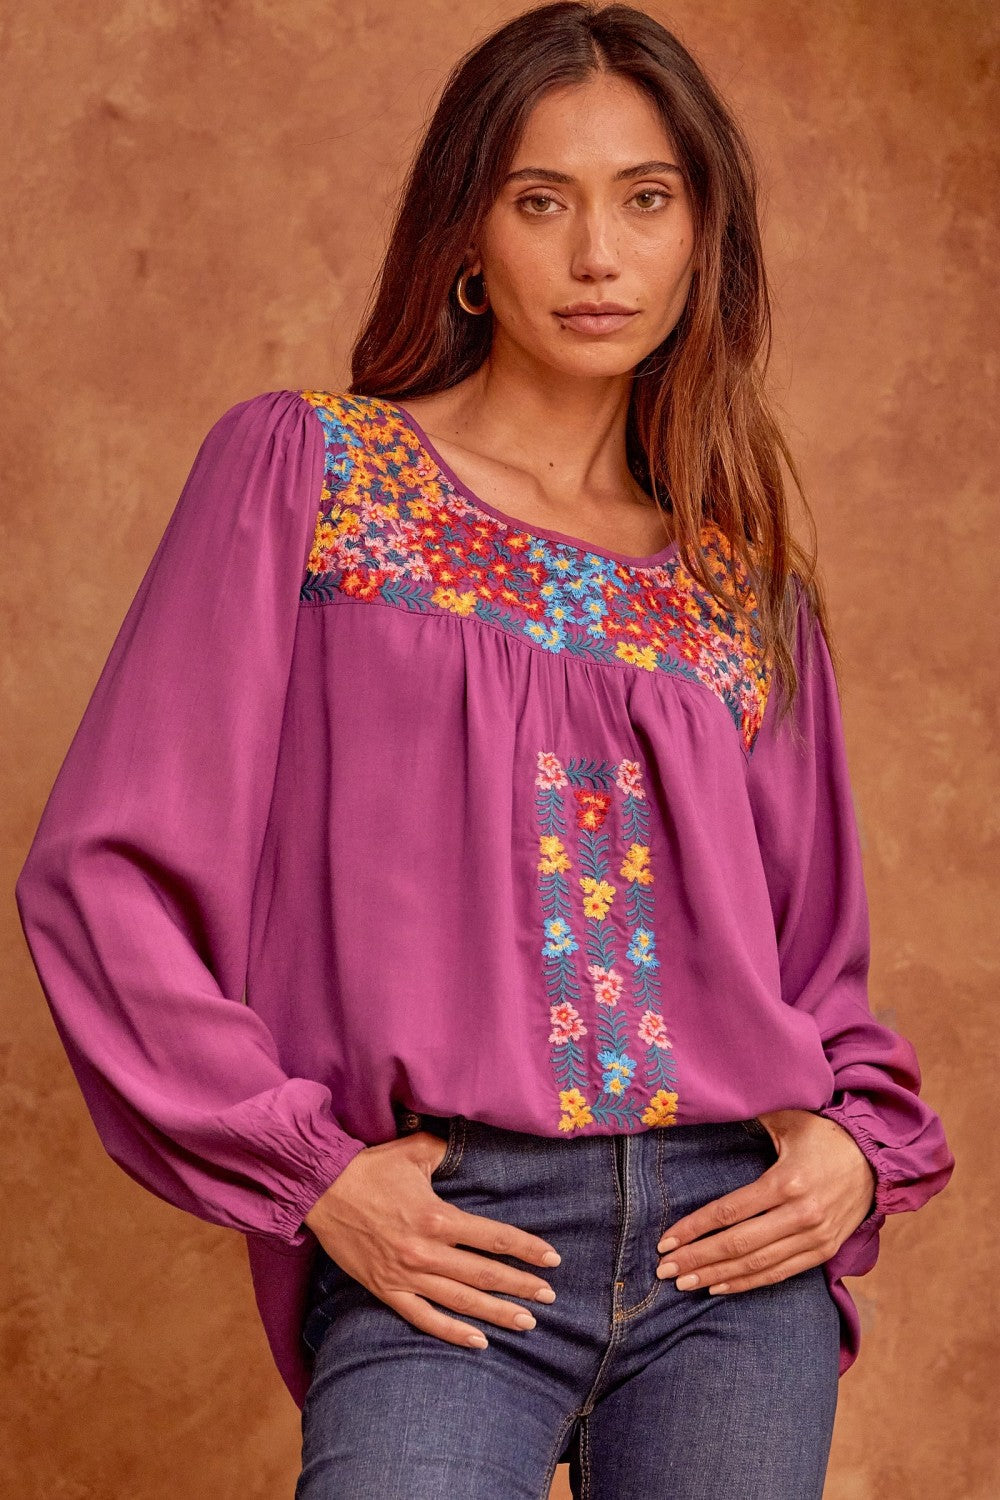 savanna jane / ANDREE BY UNIT Floral Embroidered Peasant Top – Violet Skye  Boutique